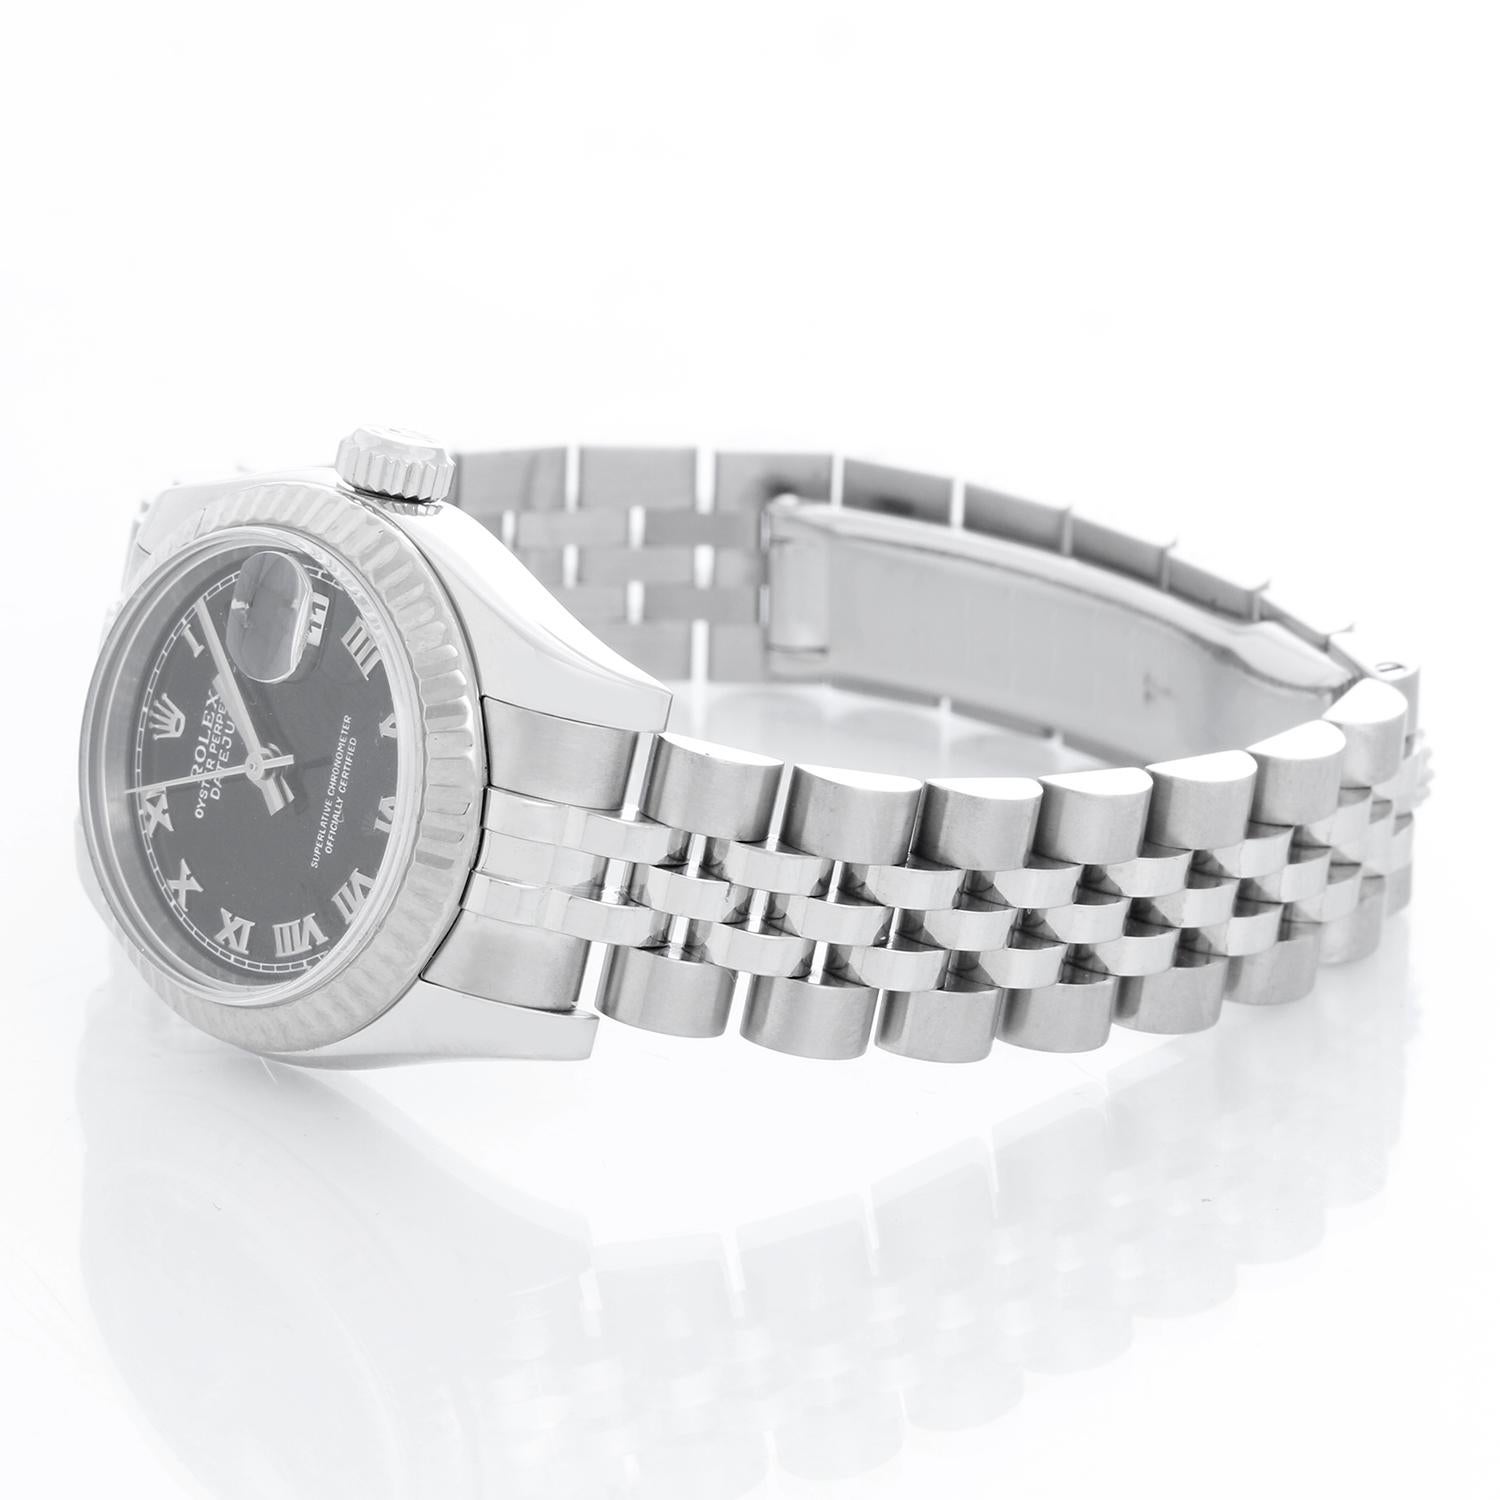 Rolex  Datejust Stainless Steel & White Gold  Ladies Watch 179174 - Automatic winding; 31 jewel; sapphire crystal. Stainless steel case with 18k white gold fluted bezel ( 26 mm) . Black dial with Roman numerals. Stainless steel hidden-clasp Jubilee